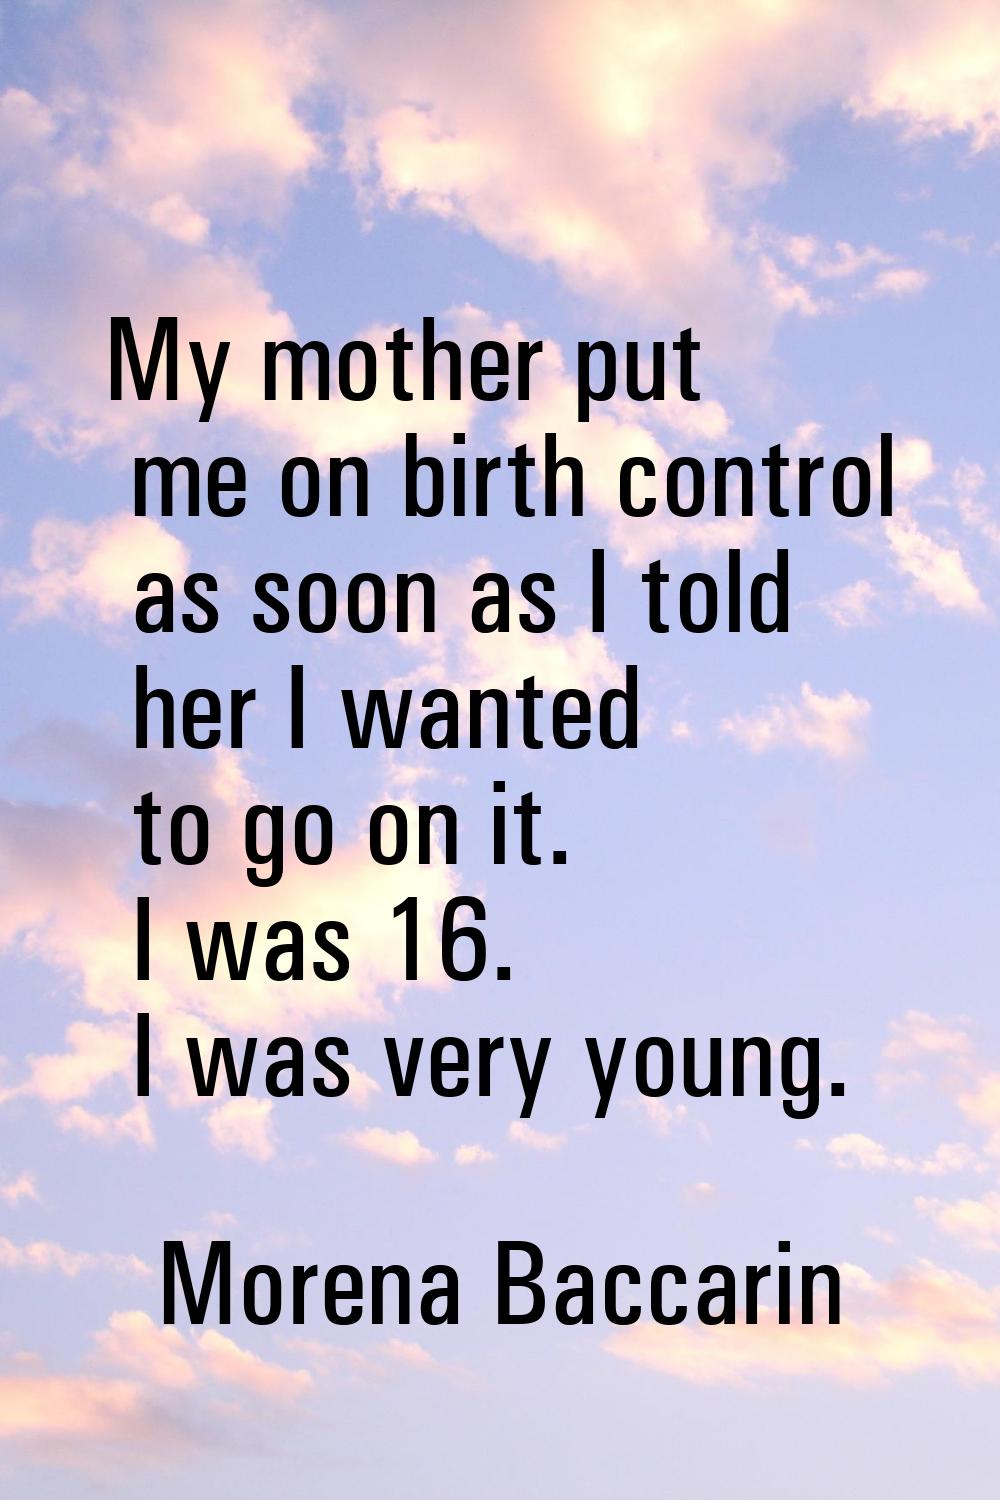 My mother put me on birth control as soon as I told her I wanted to go on it. I was 16. I was very 